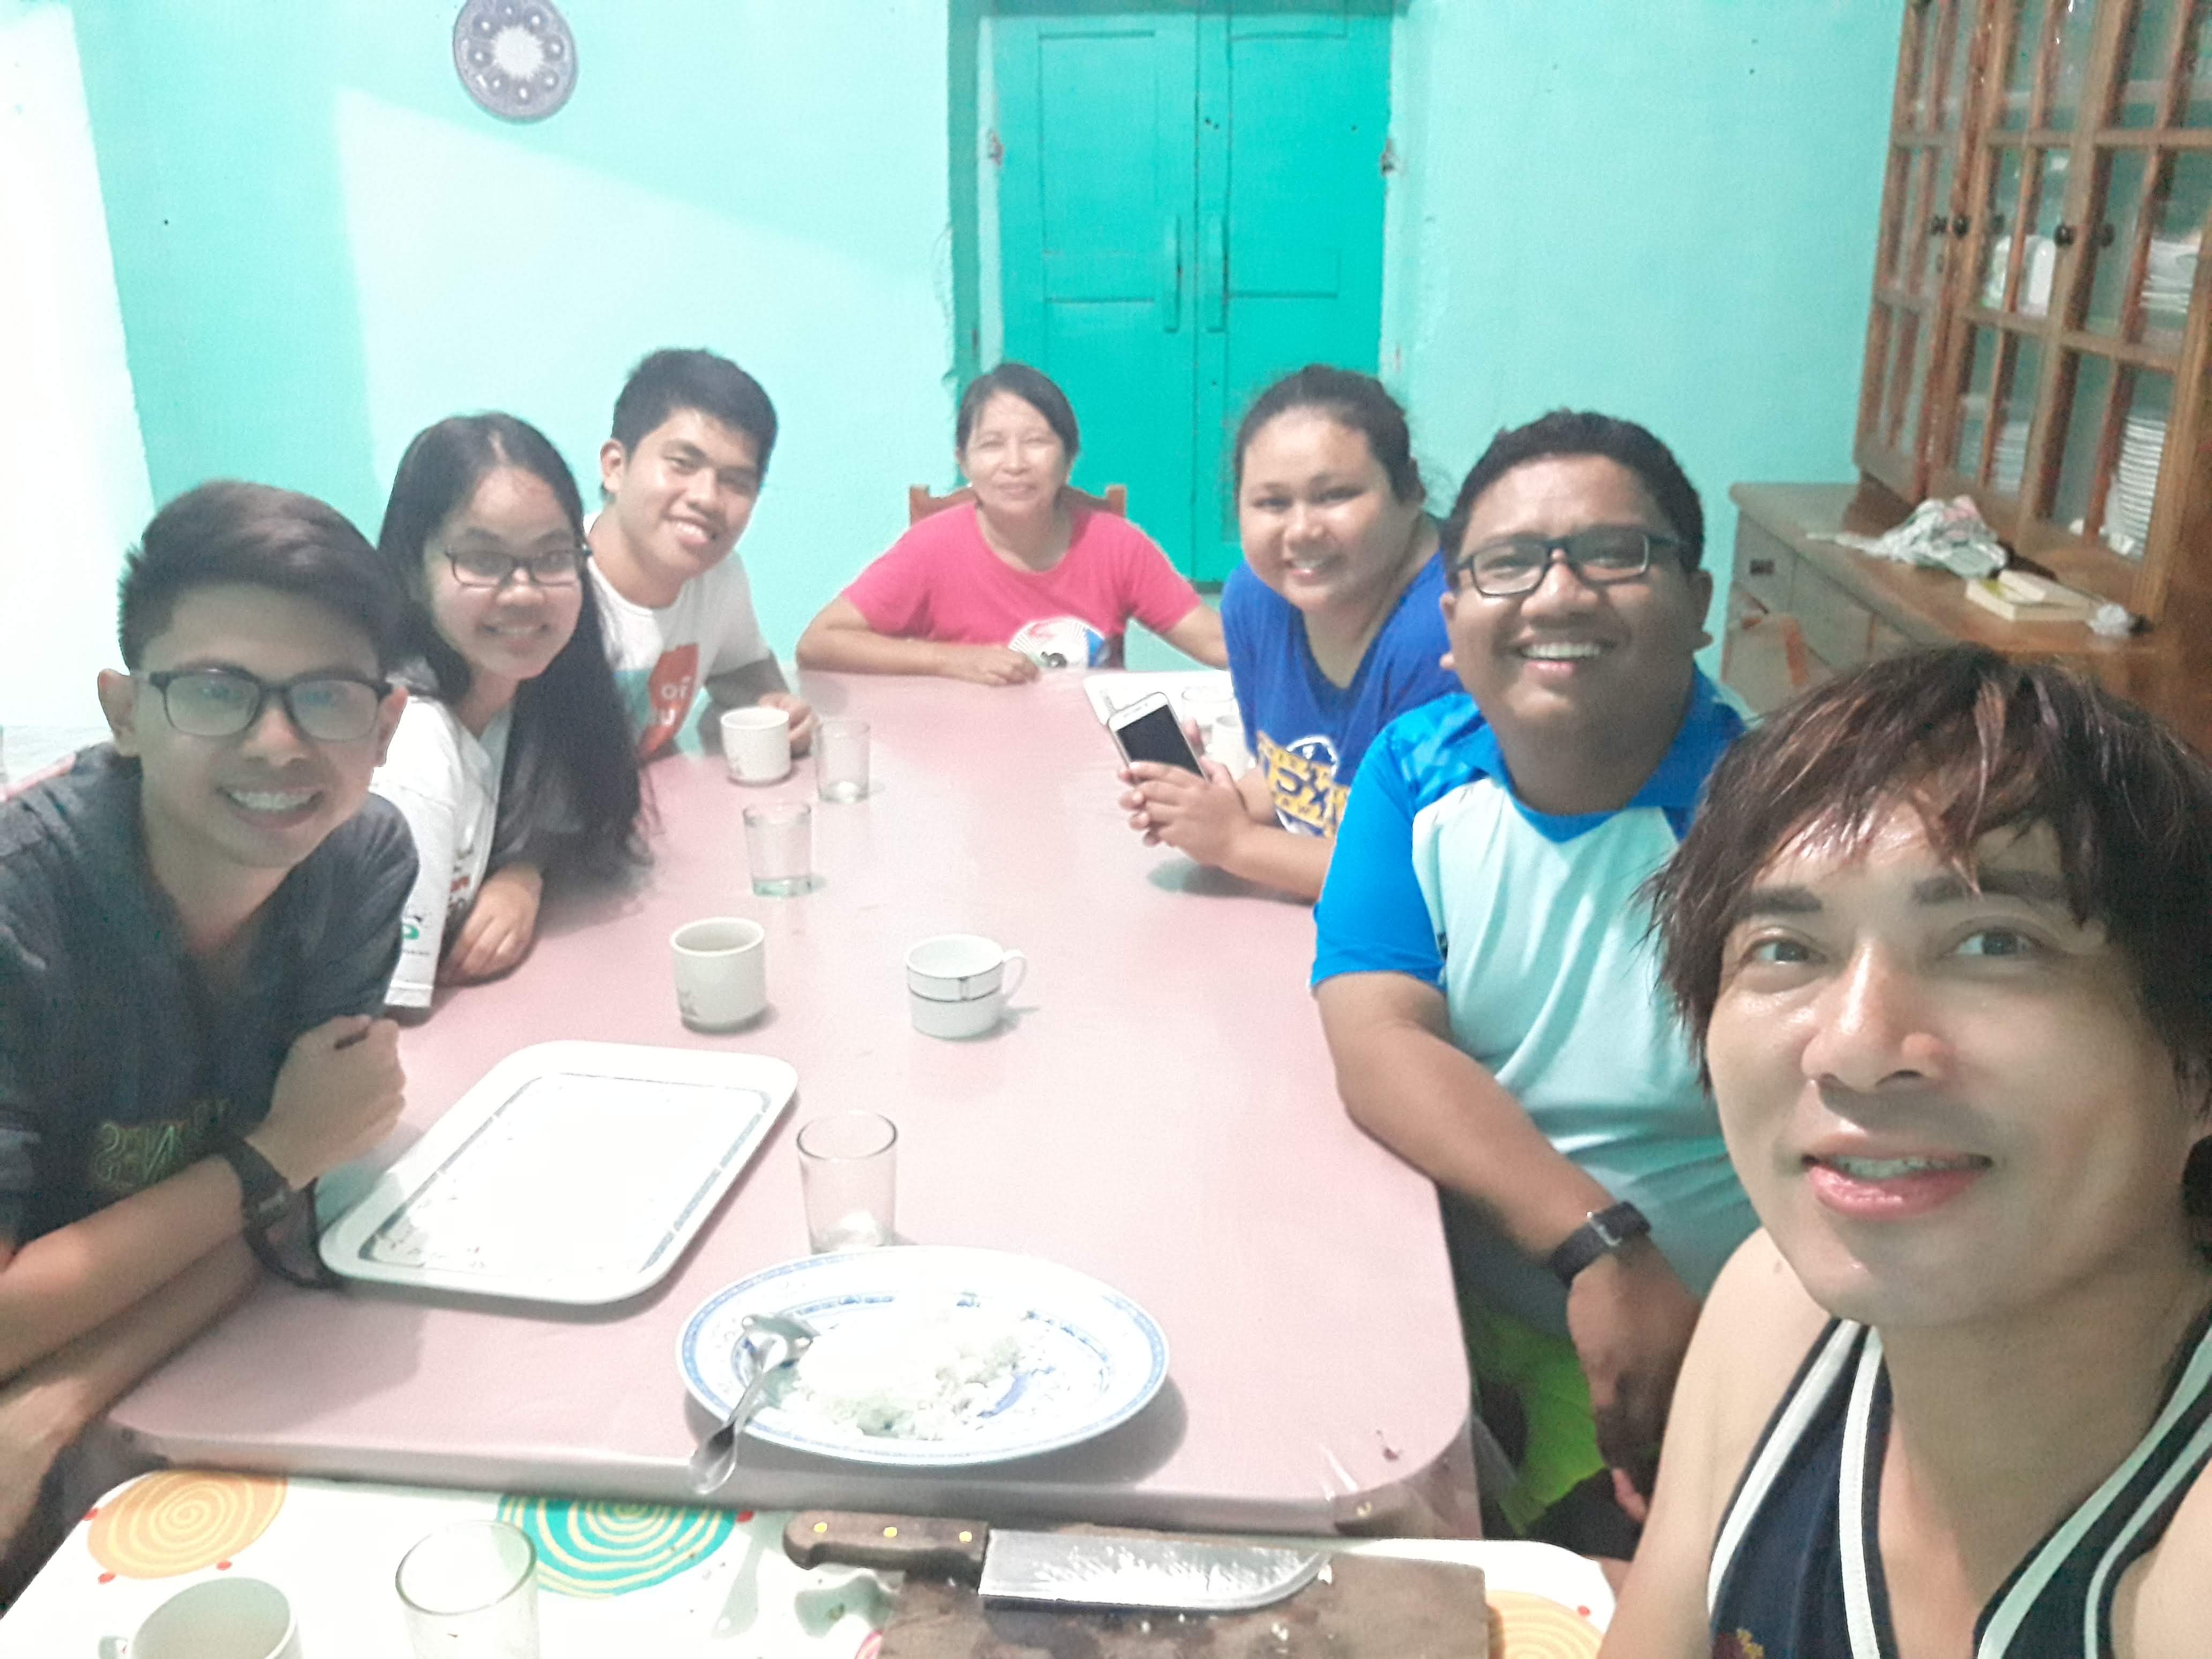 Photo-op with Tita Neyala and fellow backpackers at the dining area of Neyala's Homestay in Sabtang, Batanes